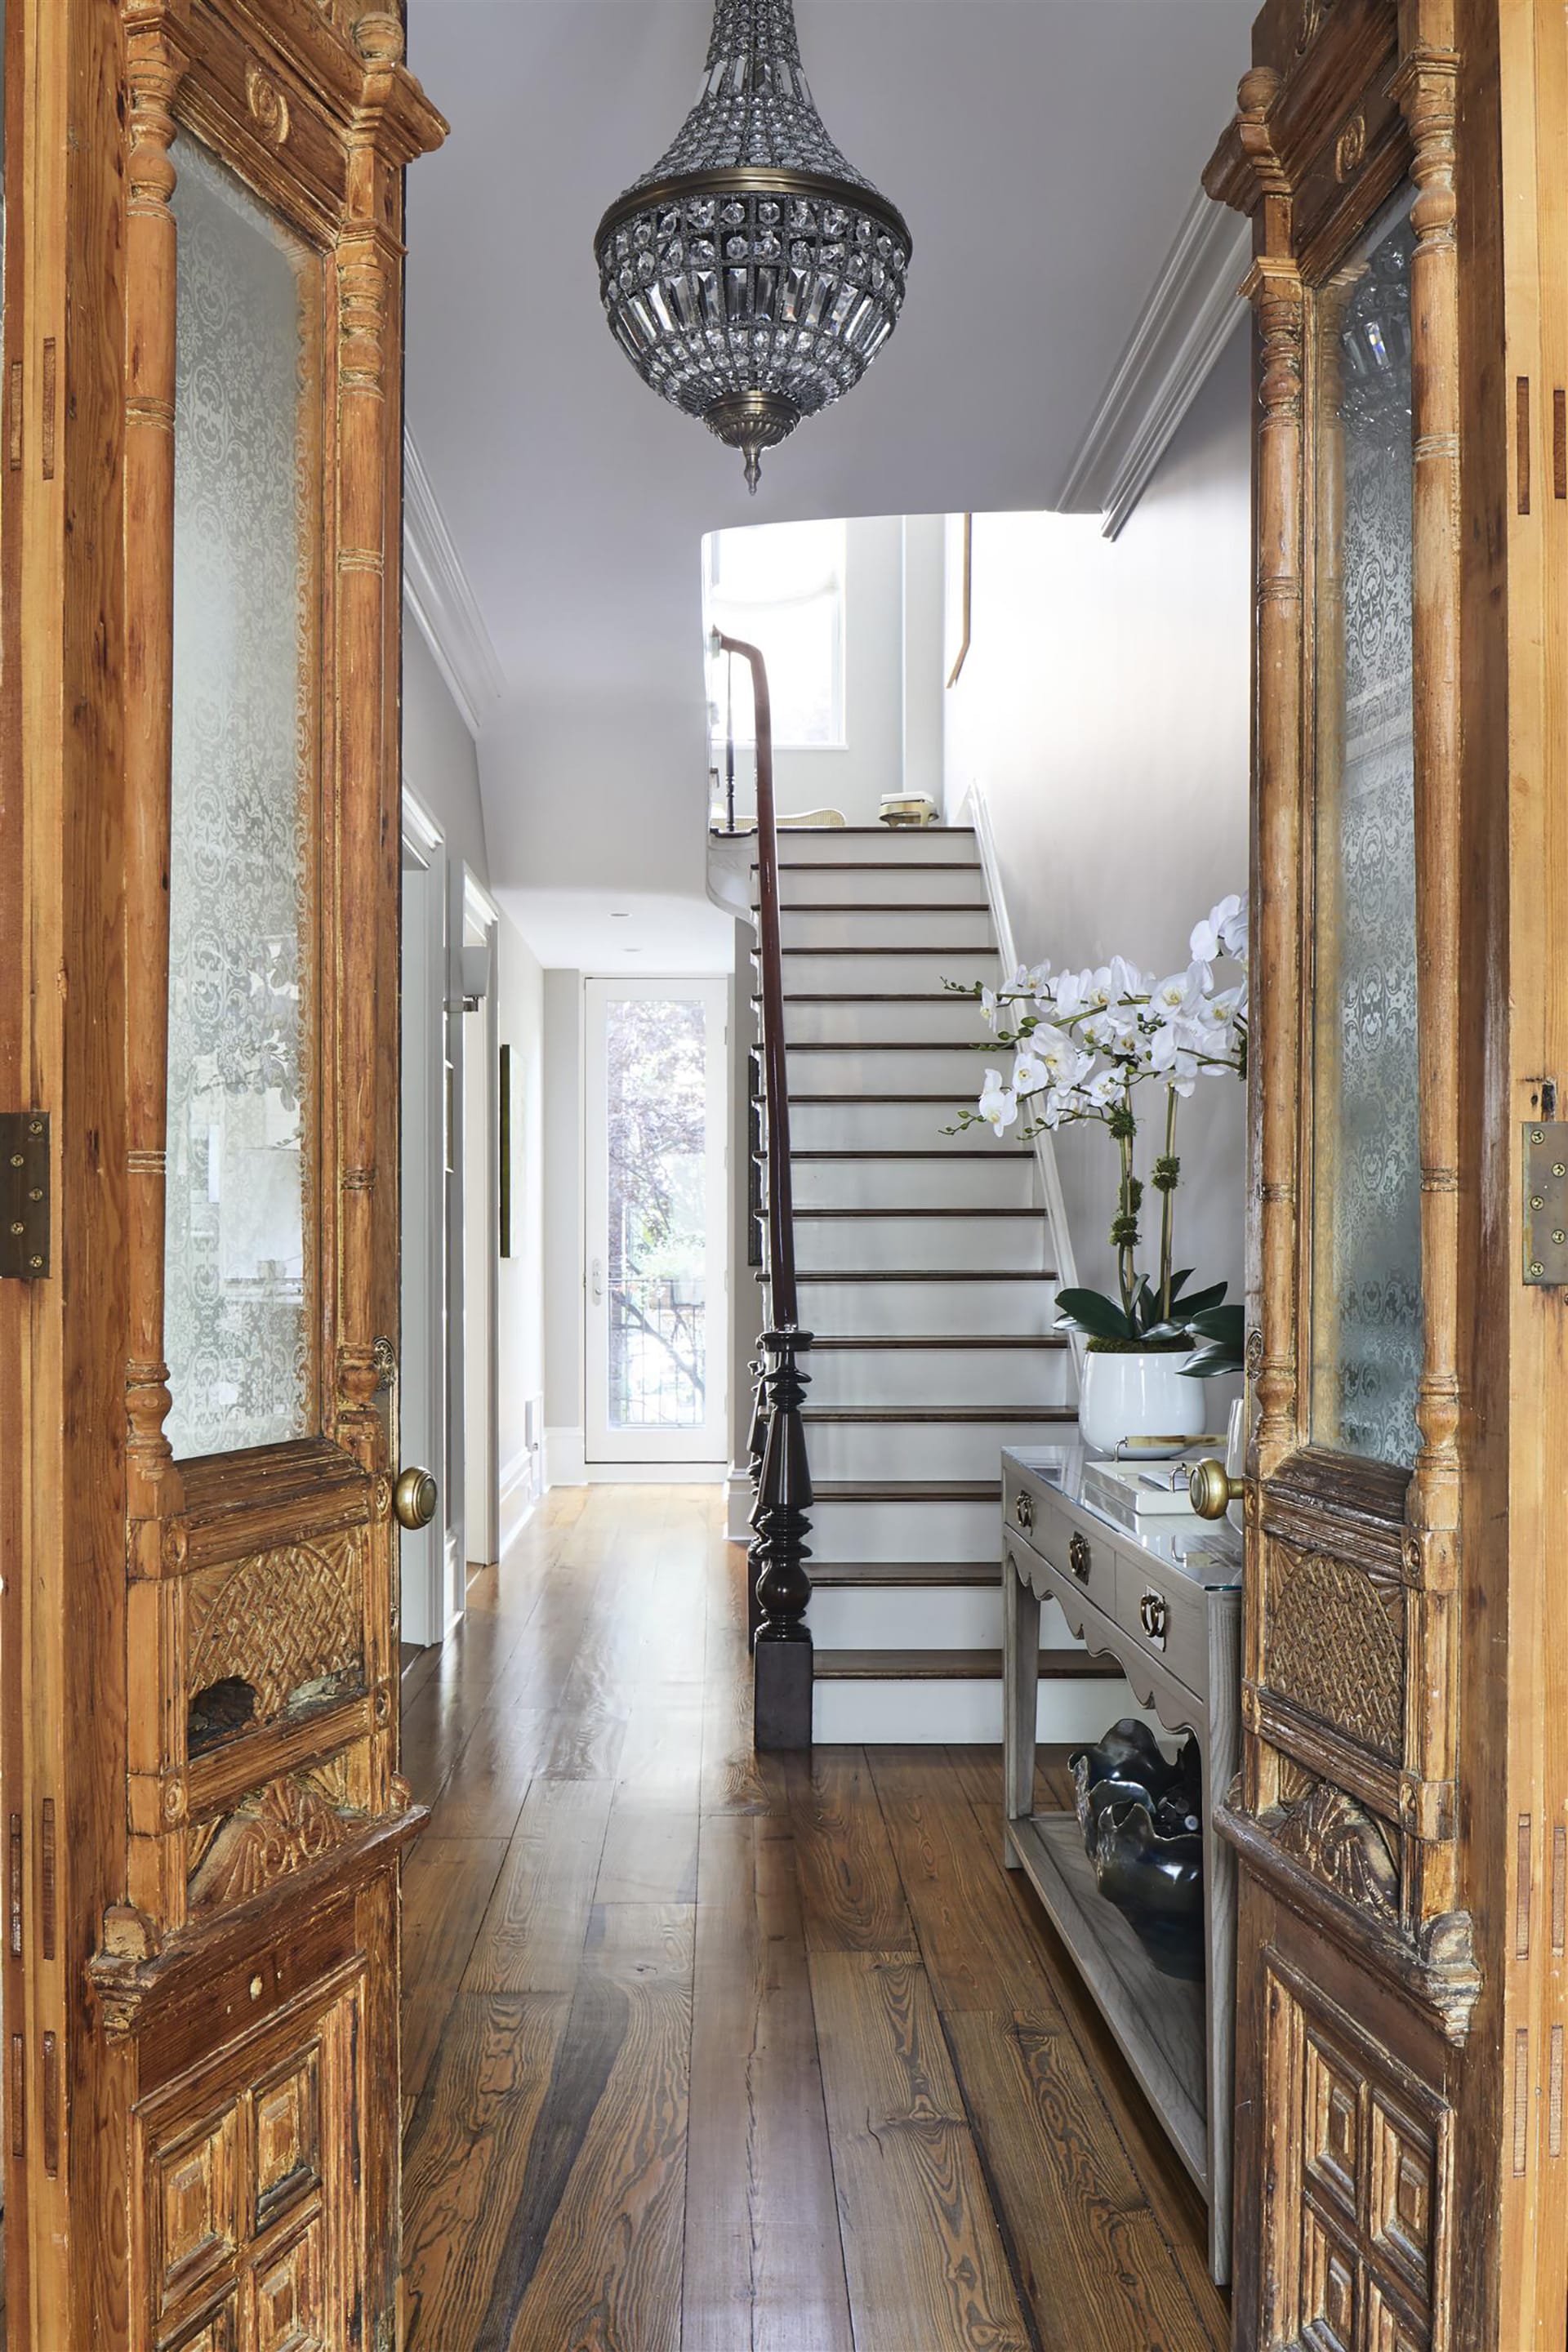 Restored historical wood doors open to reveal the entryway of a Cobble Hill townhouse with wide plank wood floors and a chandelier